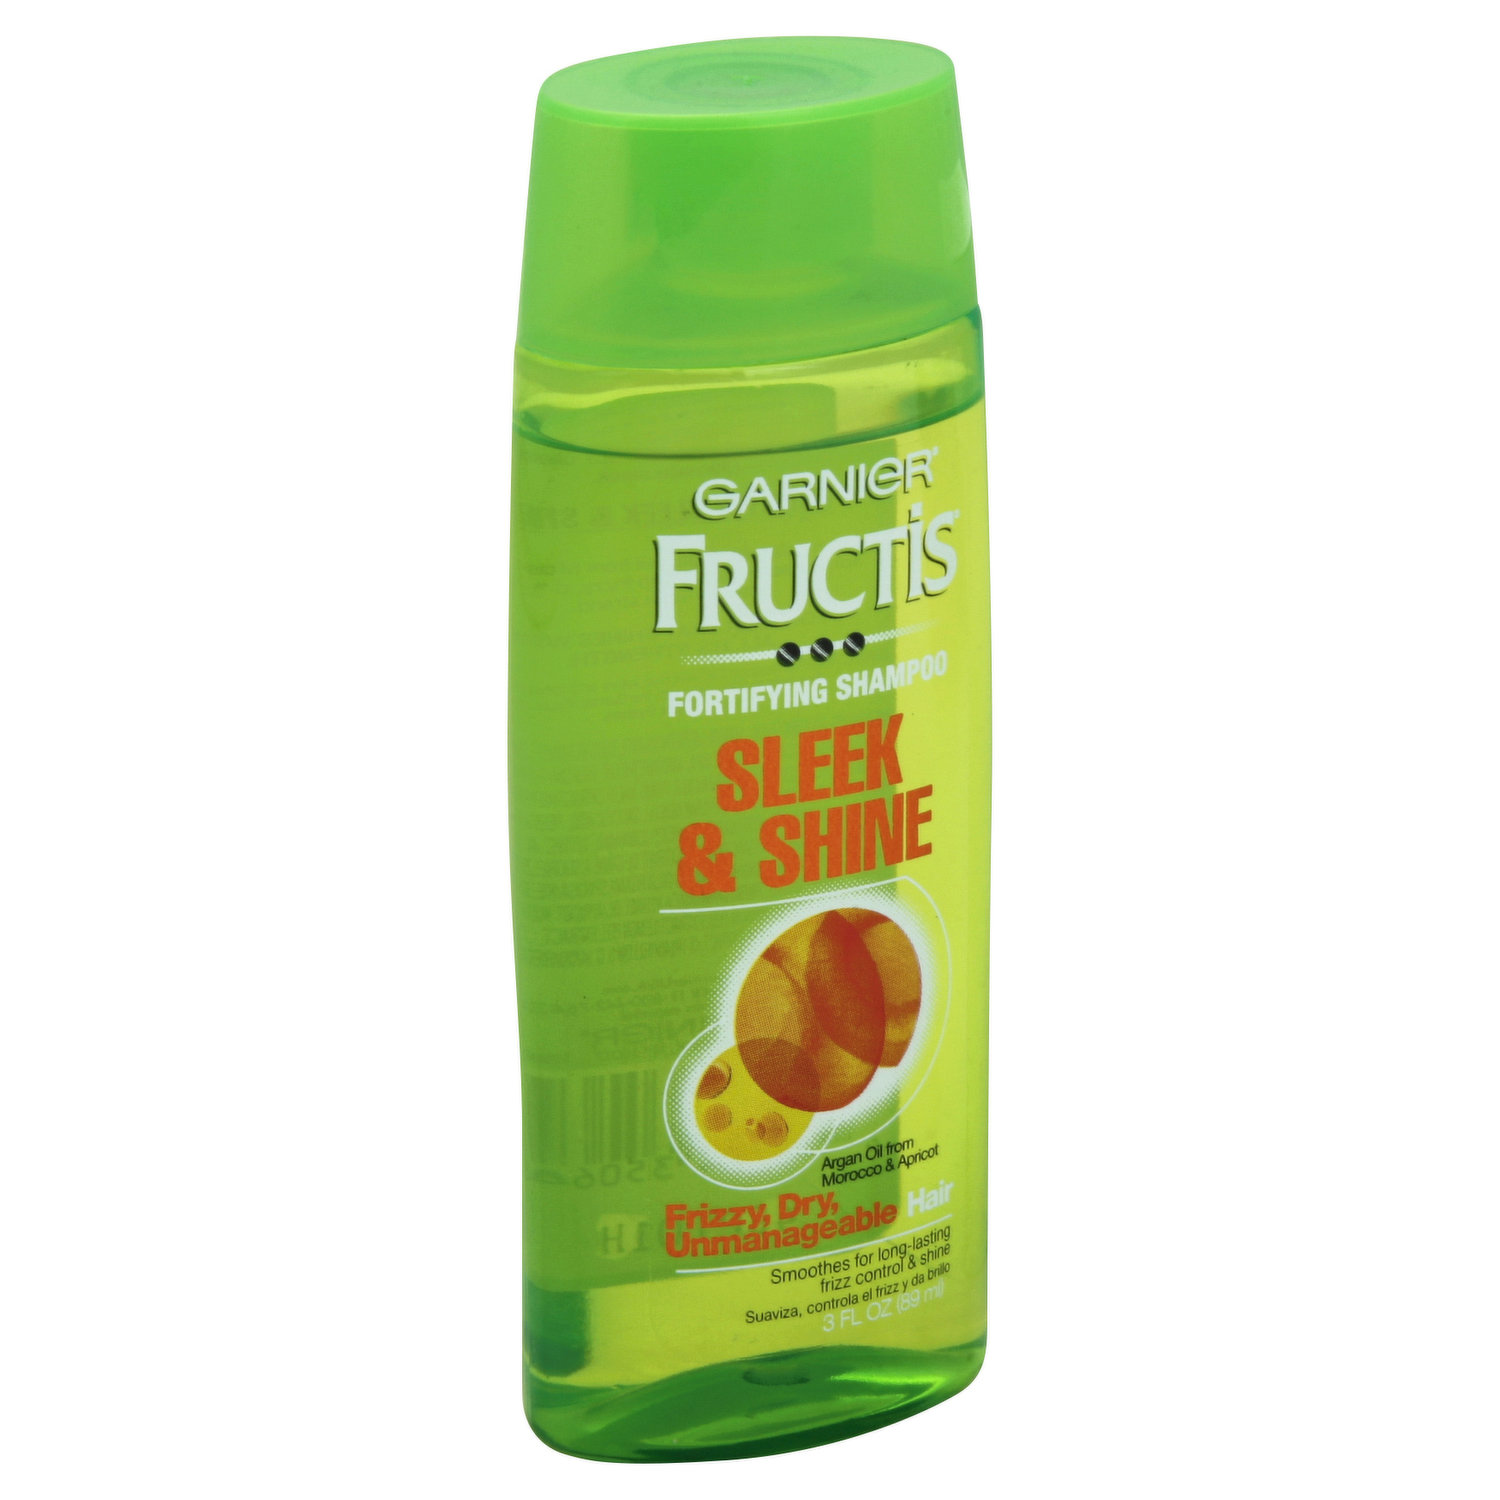 Fructis Shampoo, Fortifying, Sleek & Shine, Frizzy, Dry Unmanageable Hair